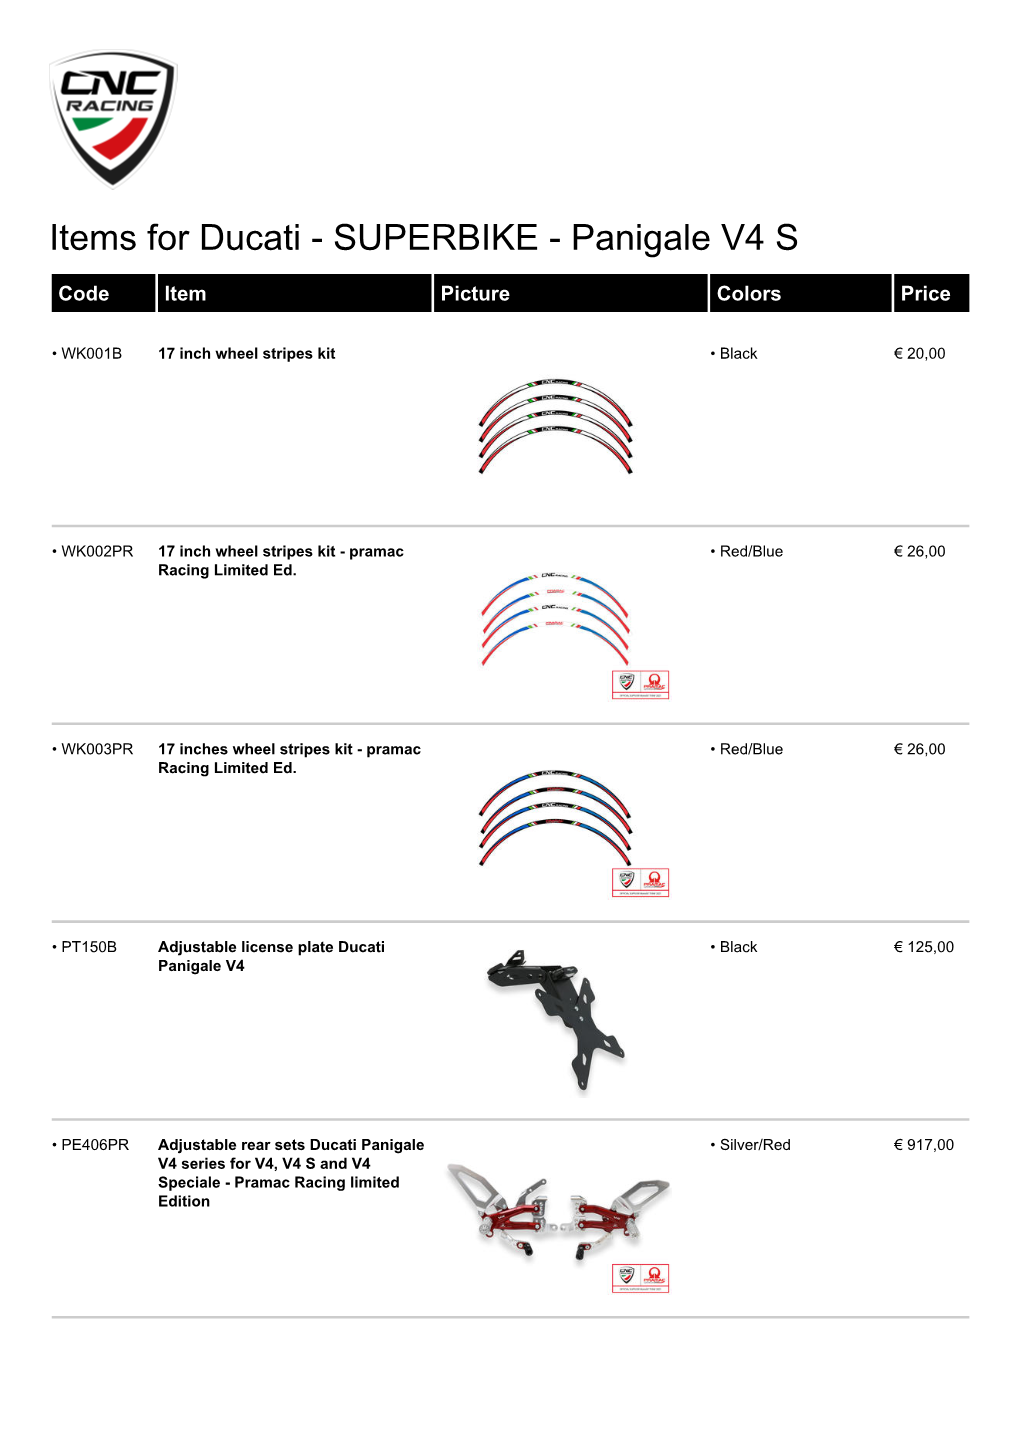 Items for Ducati - SUPERBIKE - Panigale V4 S